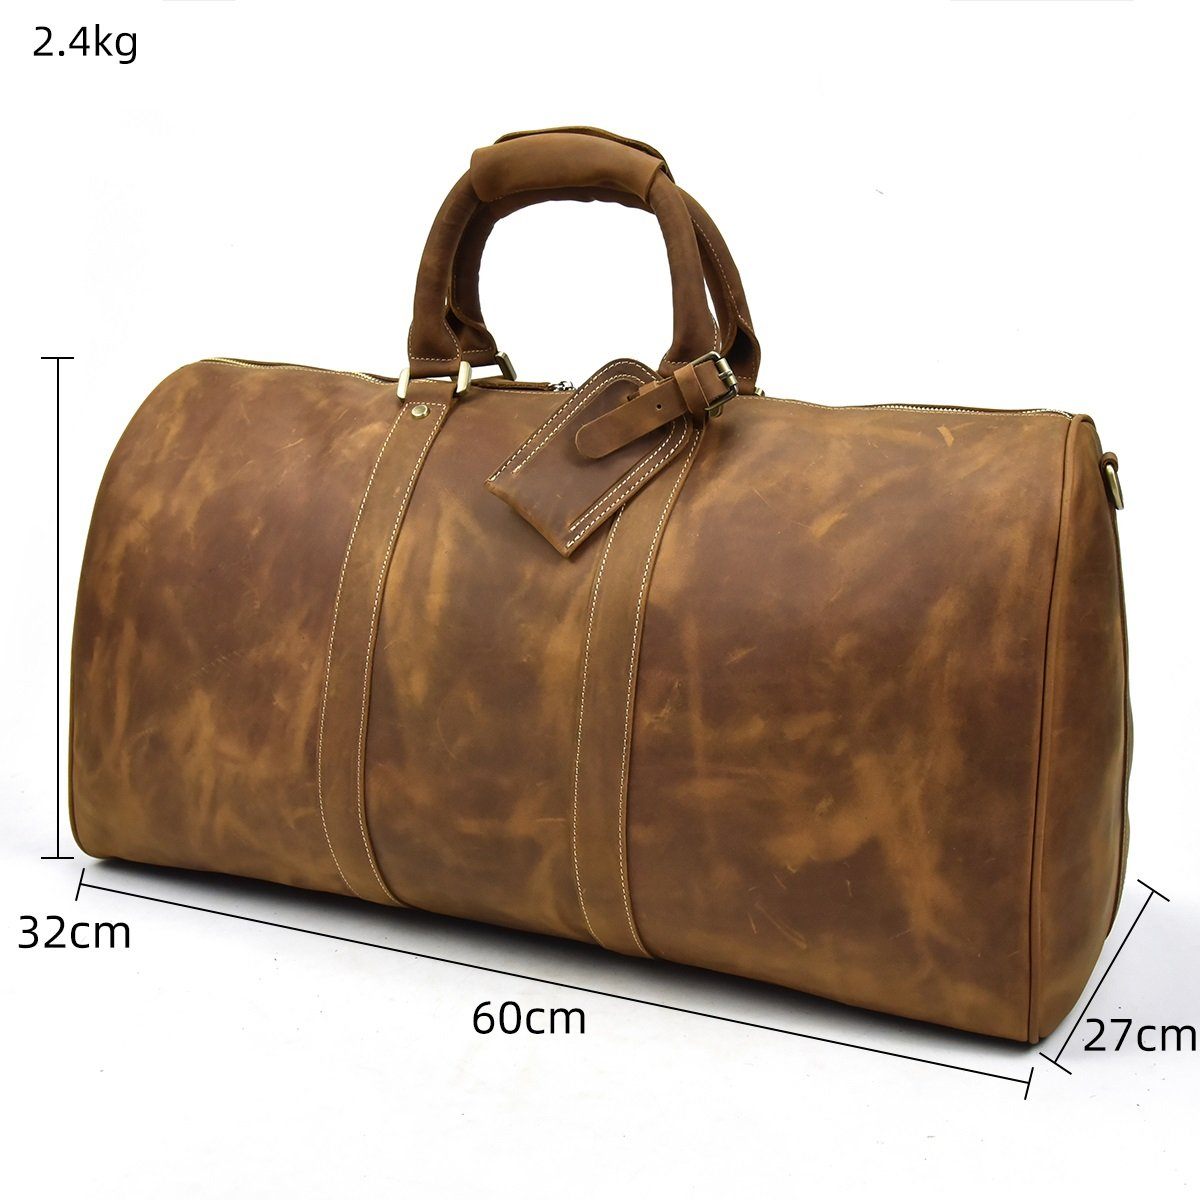 brown leather holdall bag